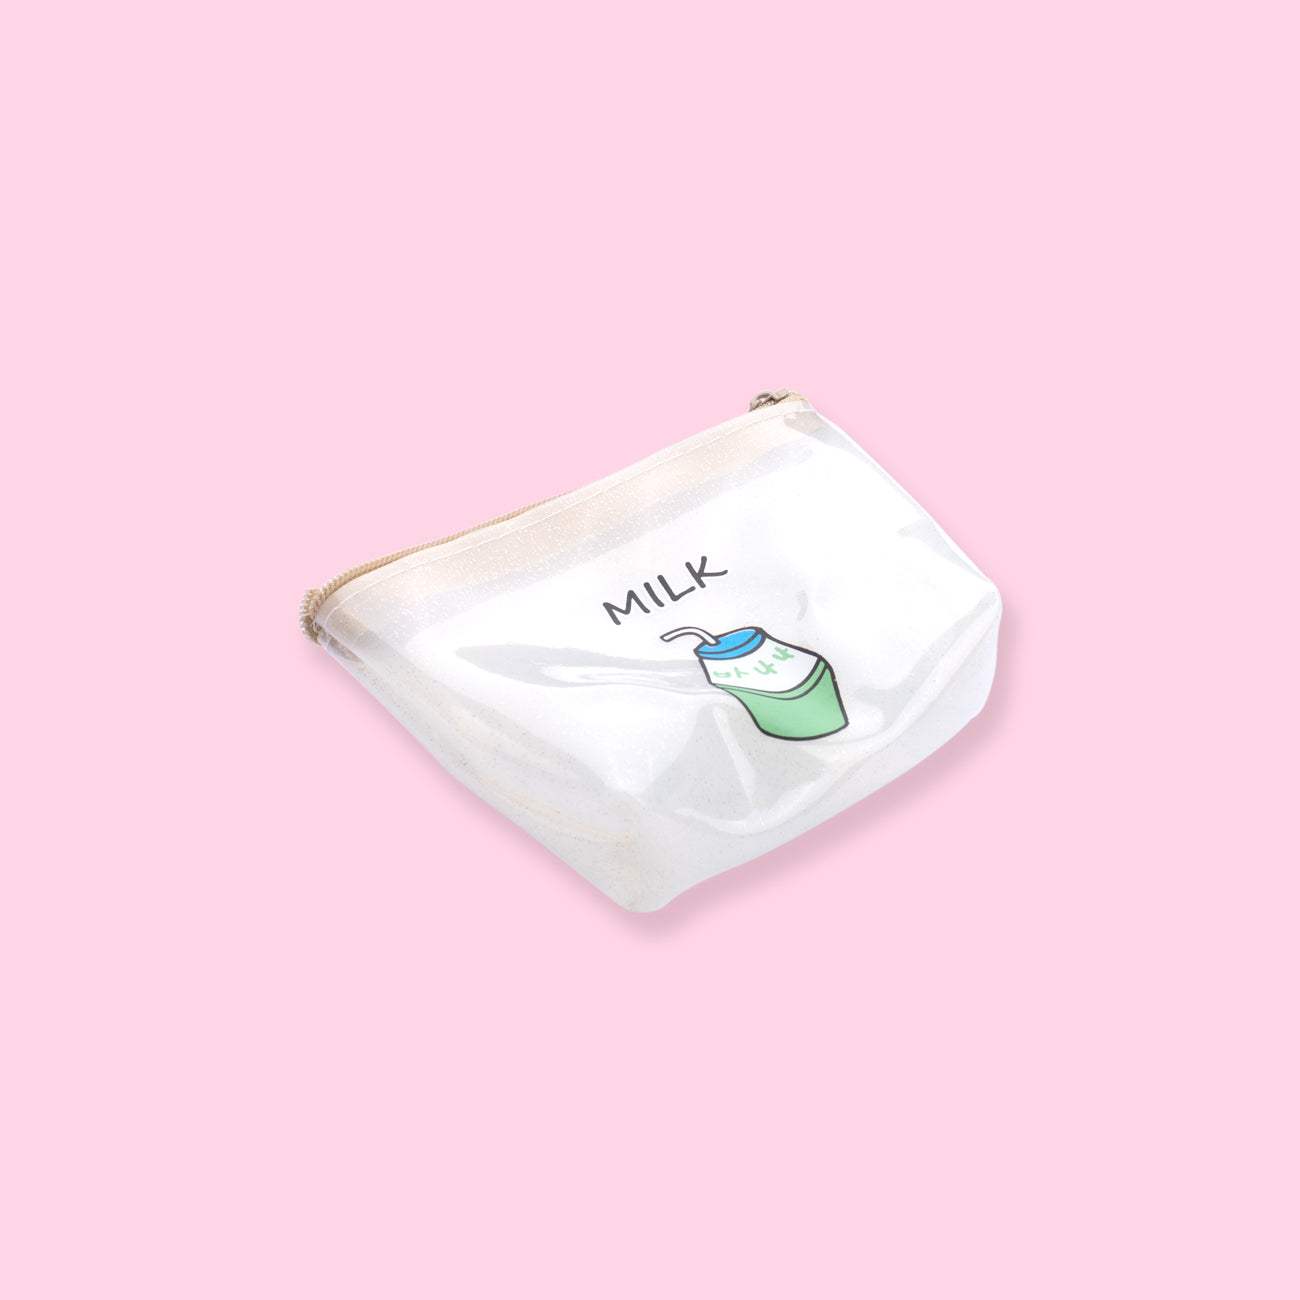 Jelly Translucent Coin Purse - Milk - Stationery Pal